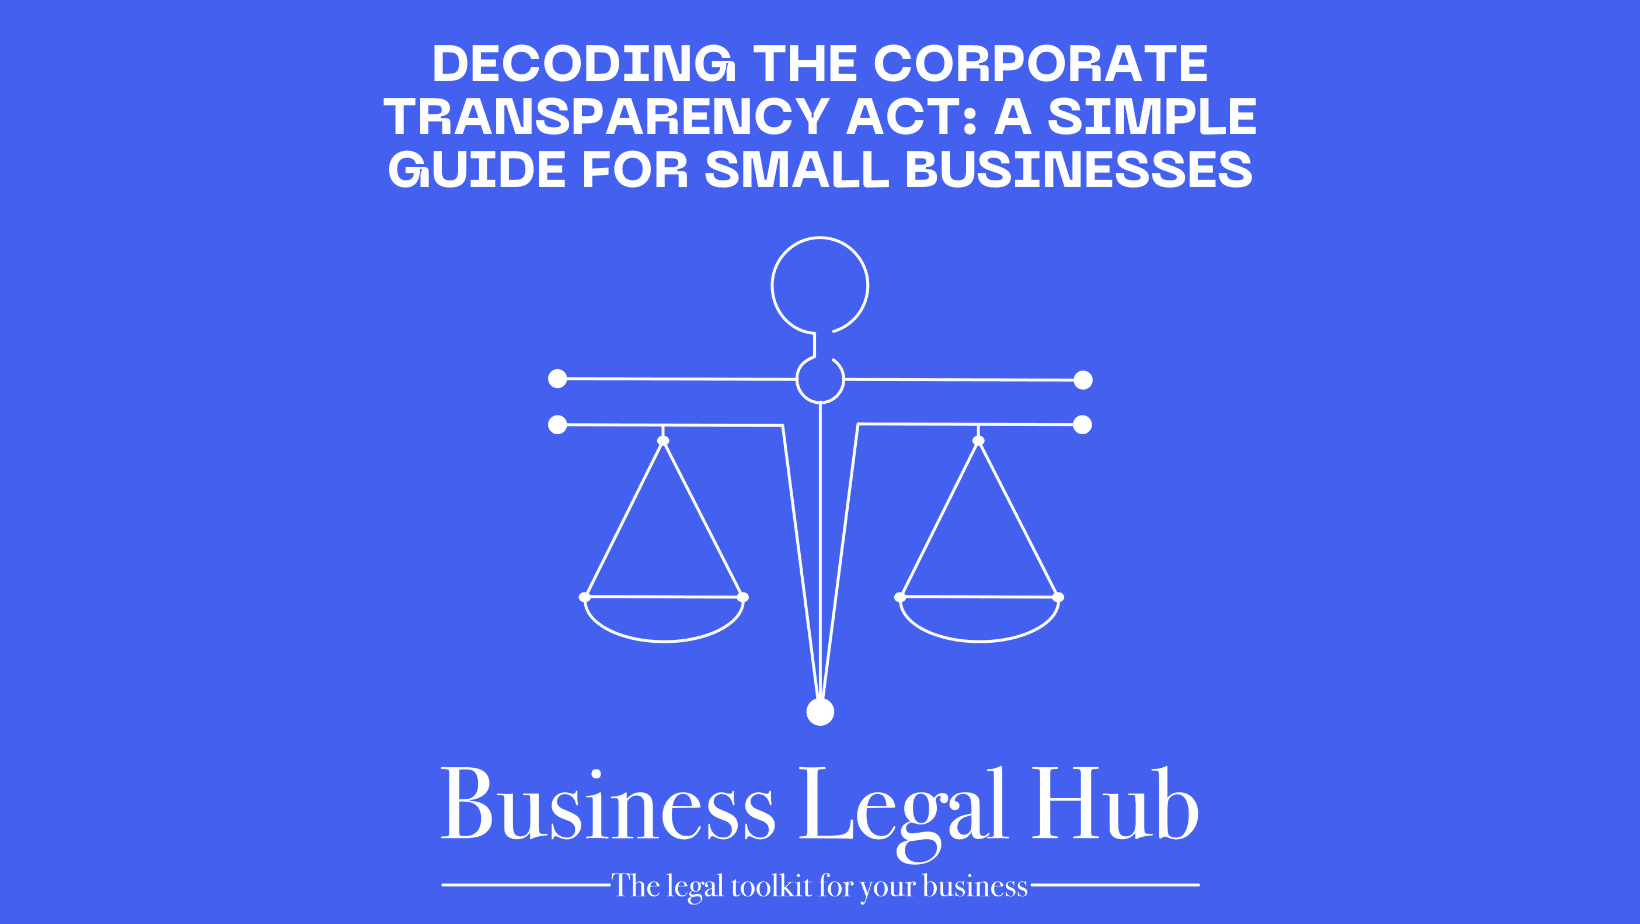 Decoding the Corporate Transparency Act: A Simple Guide for Small Businesses - Business Legal Hub